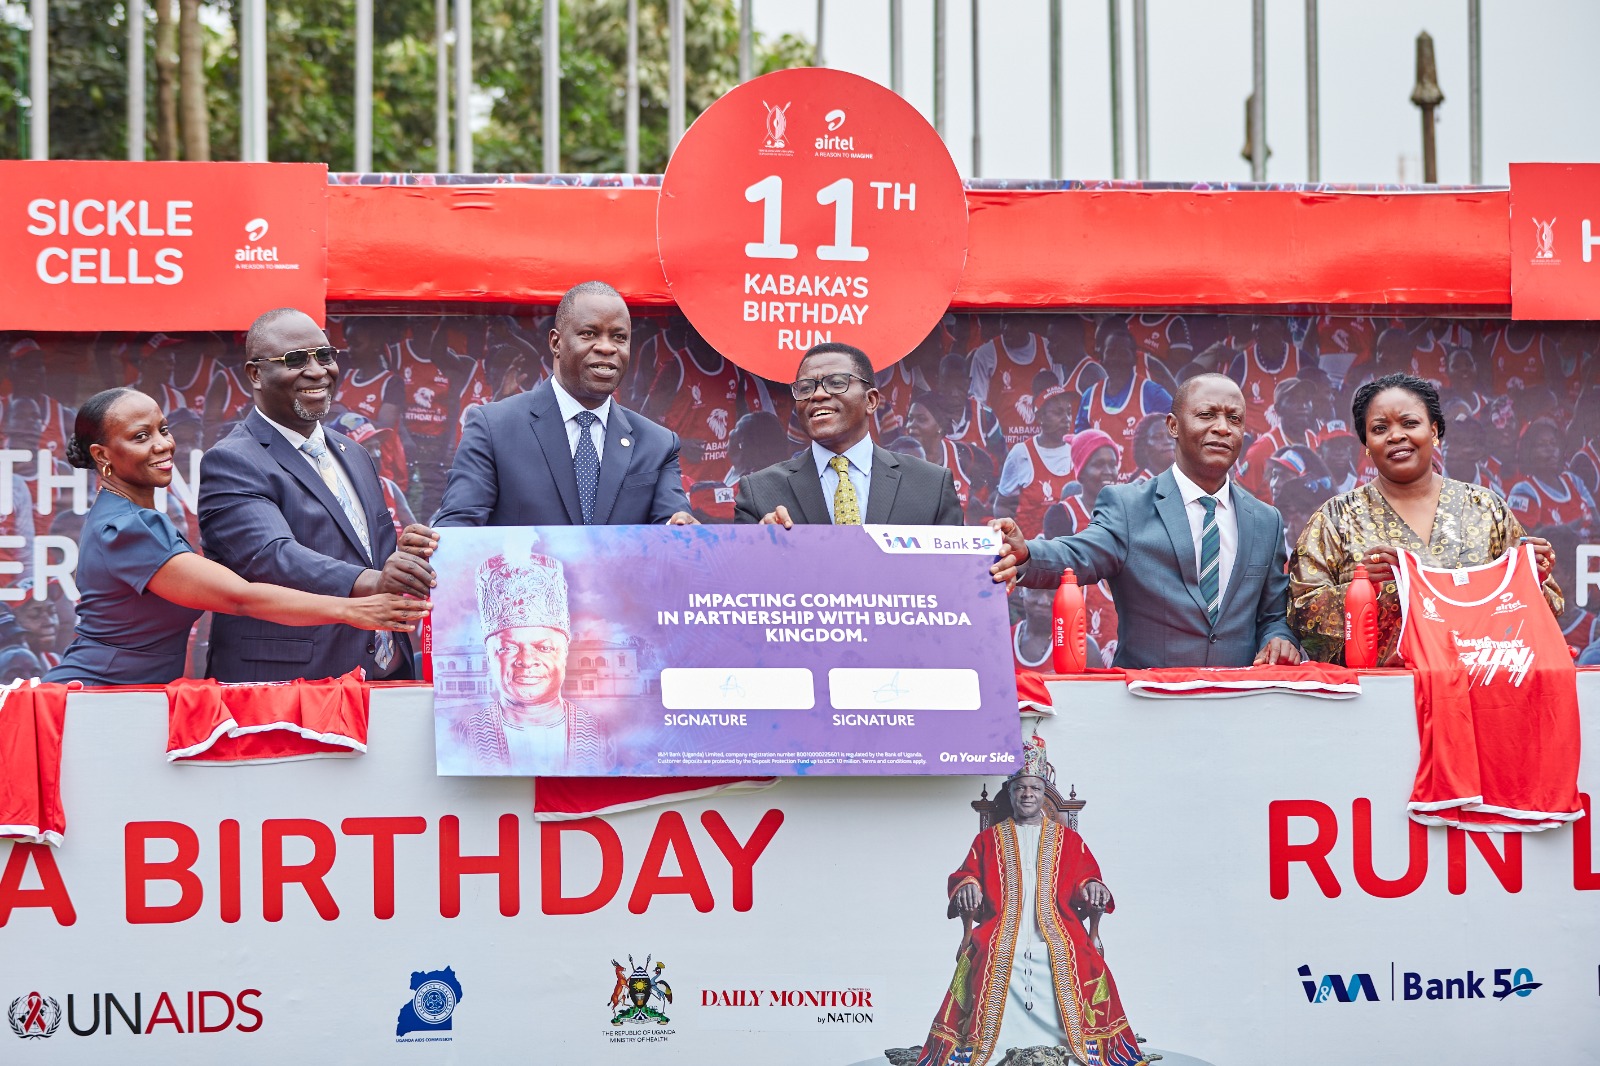 I&M reaffirms support to Kabaka birthday run as official bank sponsor